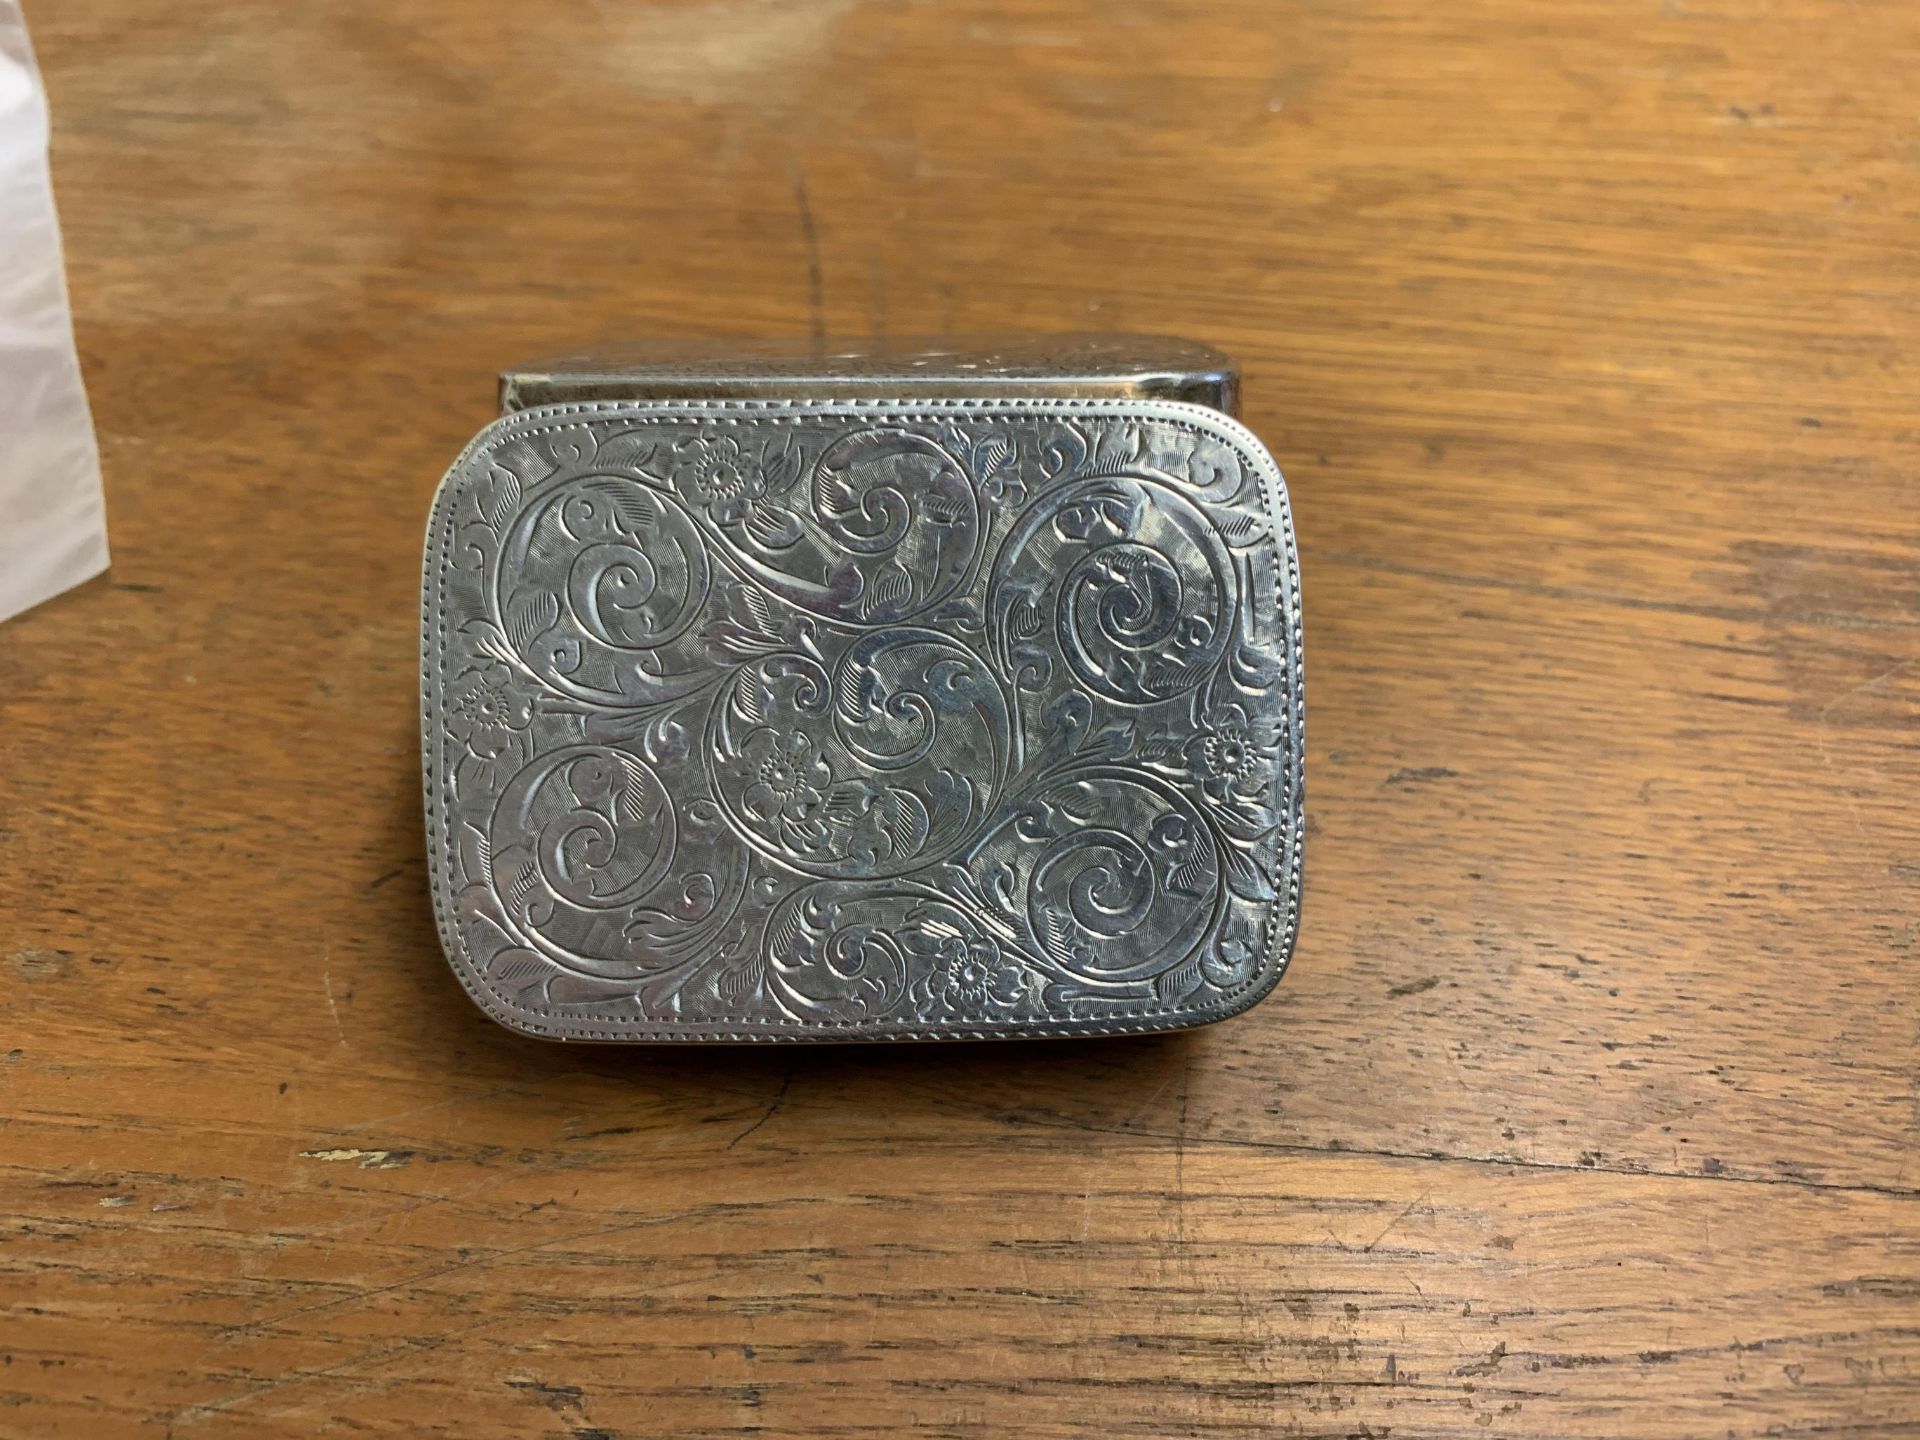 Silver snuff box believed hall marked Birmingham 1939 - Image 4 of 4